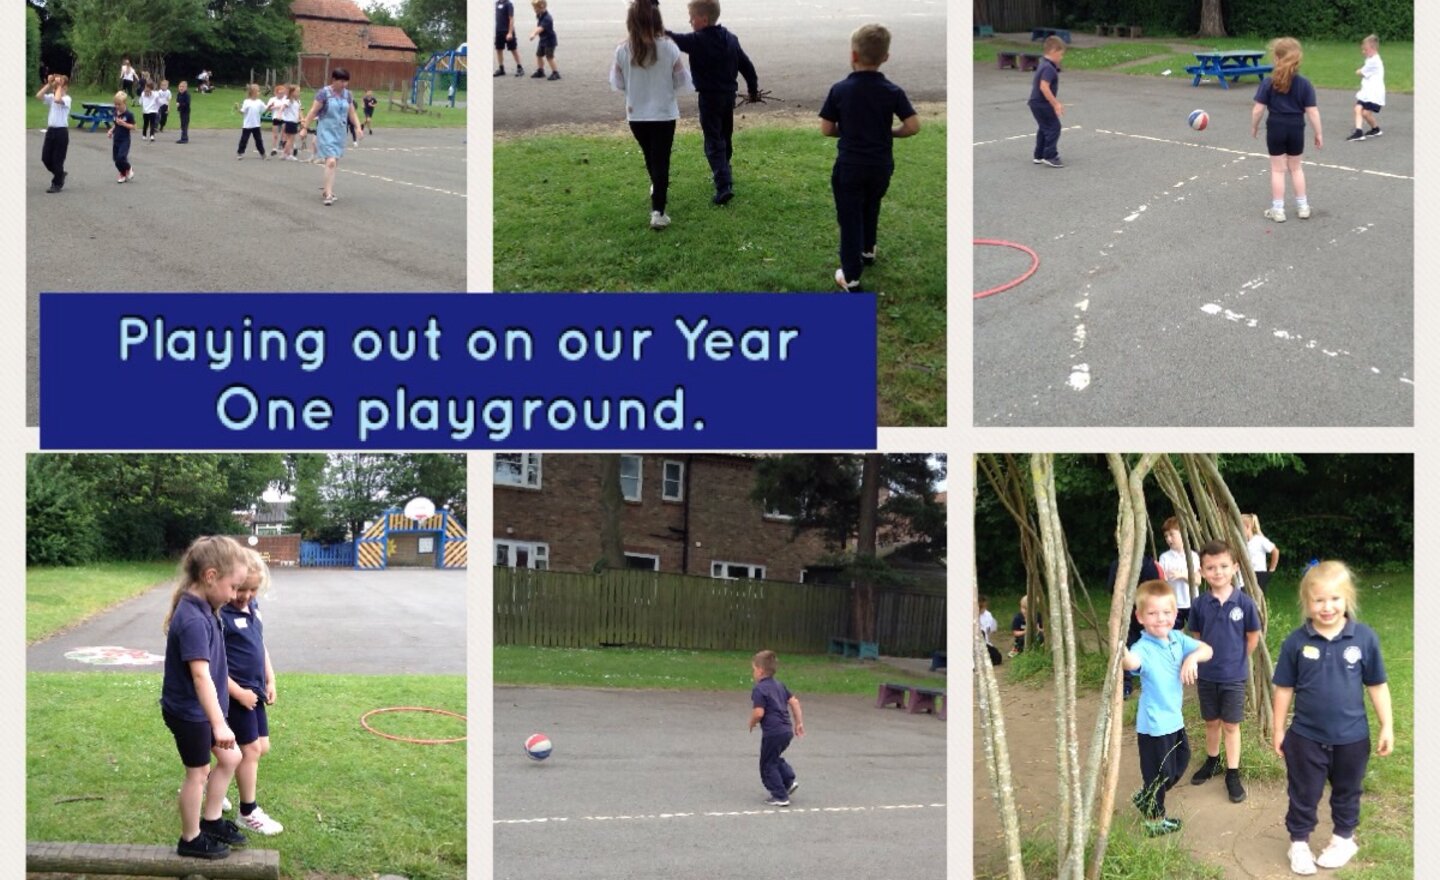 Image of Playtime on the year One playground